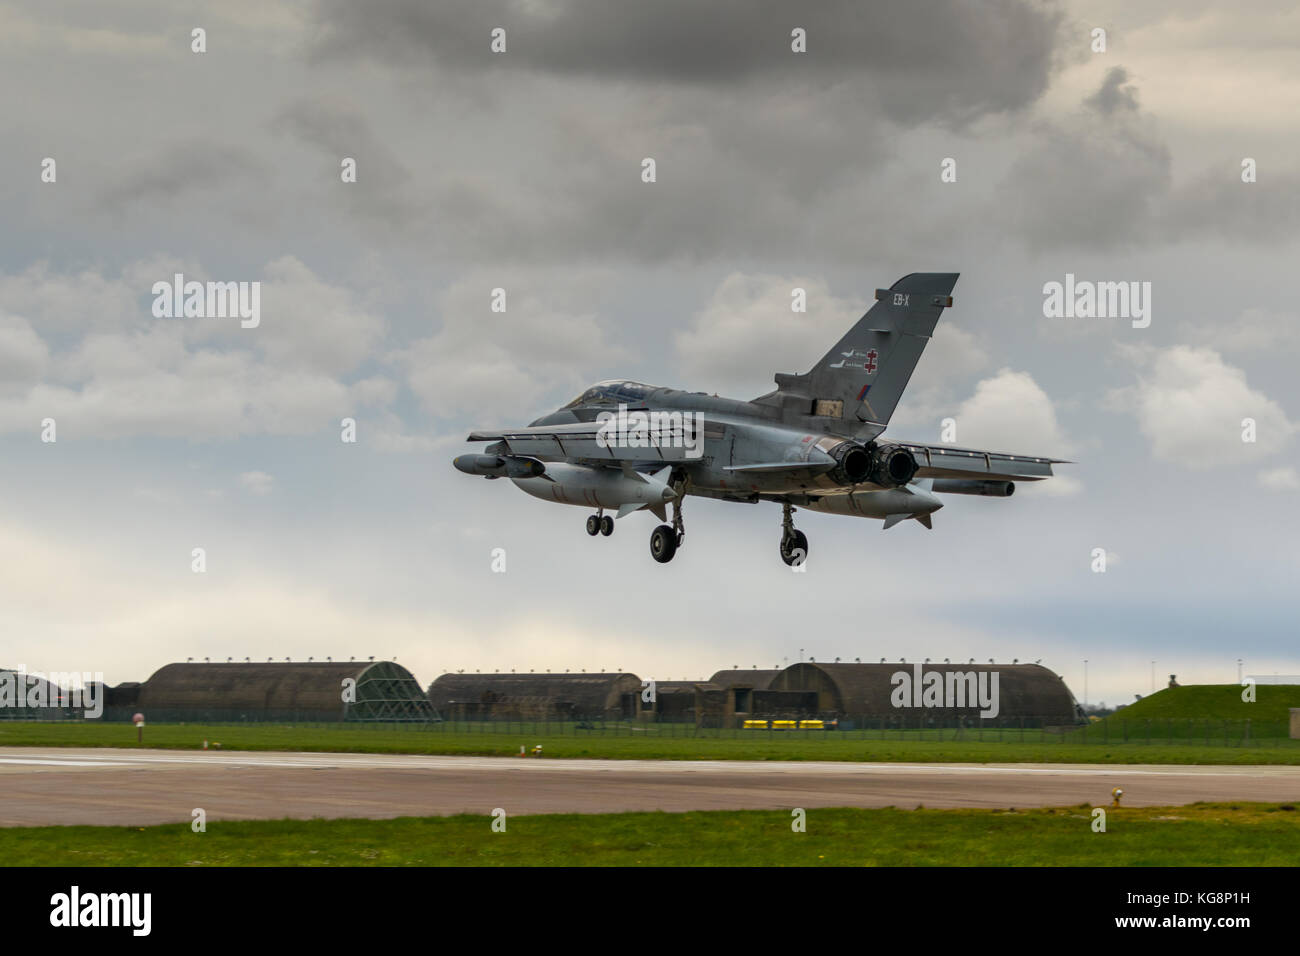 41(R) sqdn coming in to land at RAF Coningsby Stock Photo